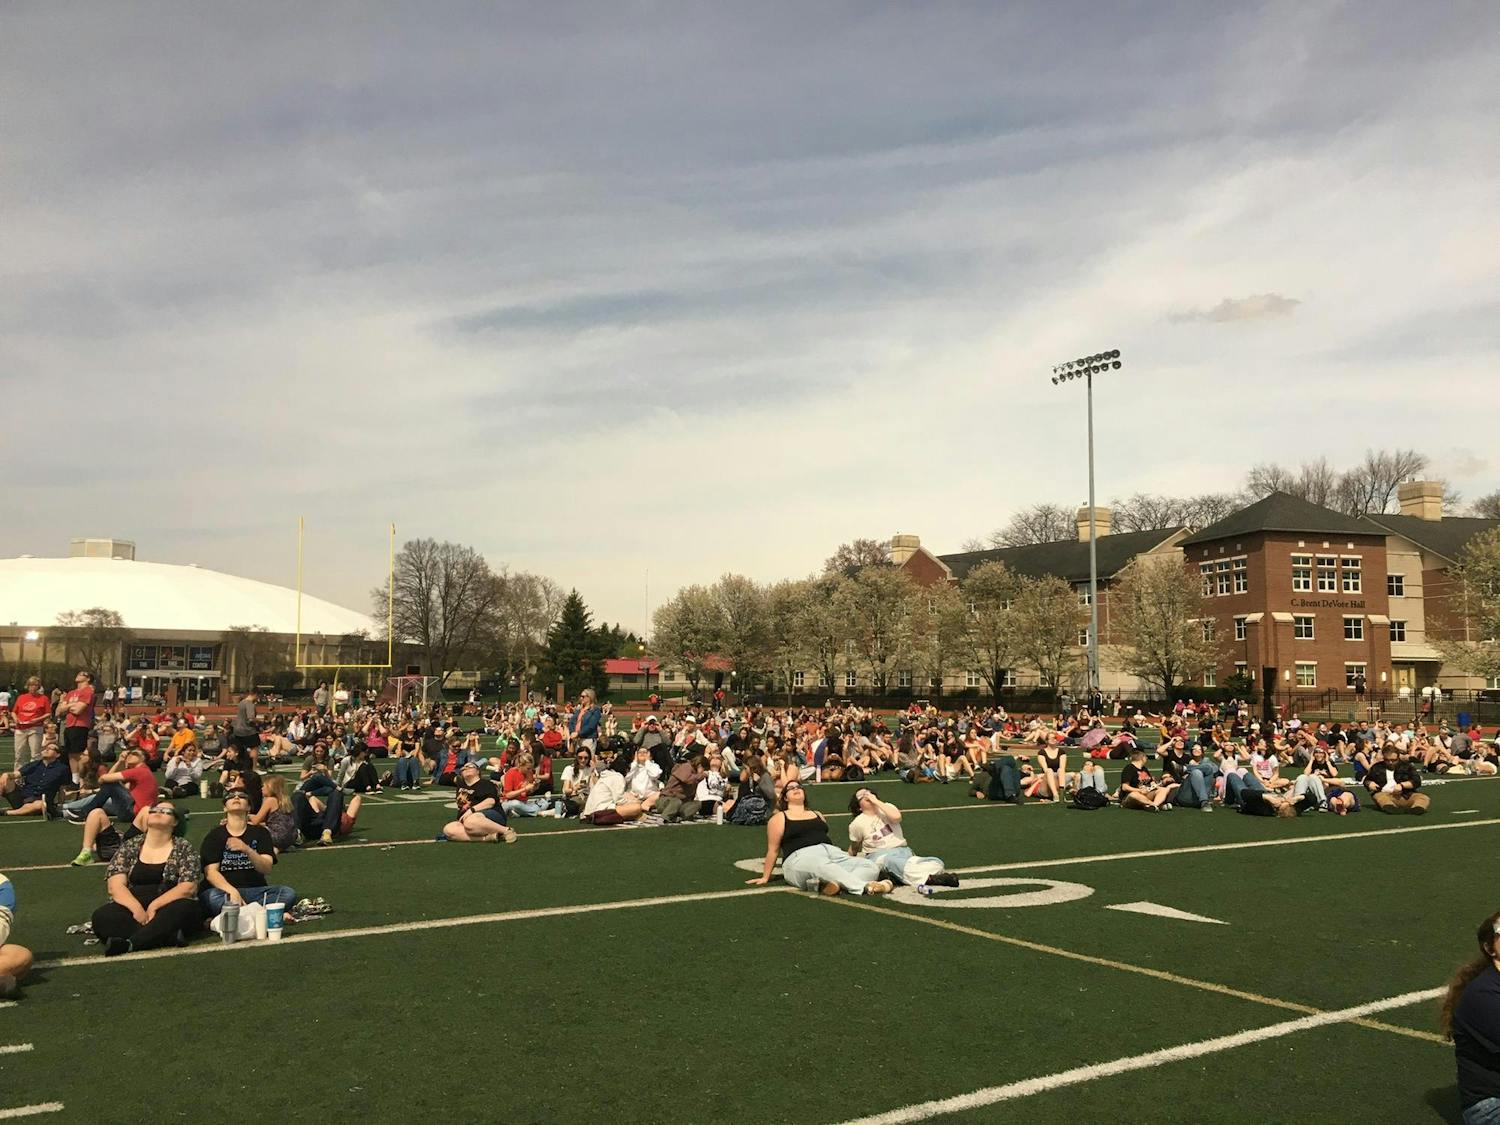 A football field filled with people sitting and laying on the grass turf, looking up at the sky with solar eclipse glasses on.